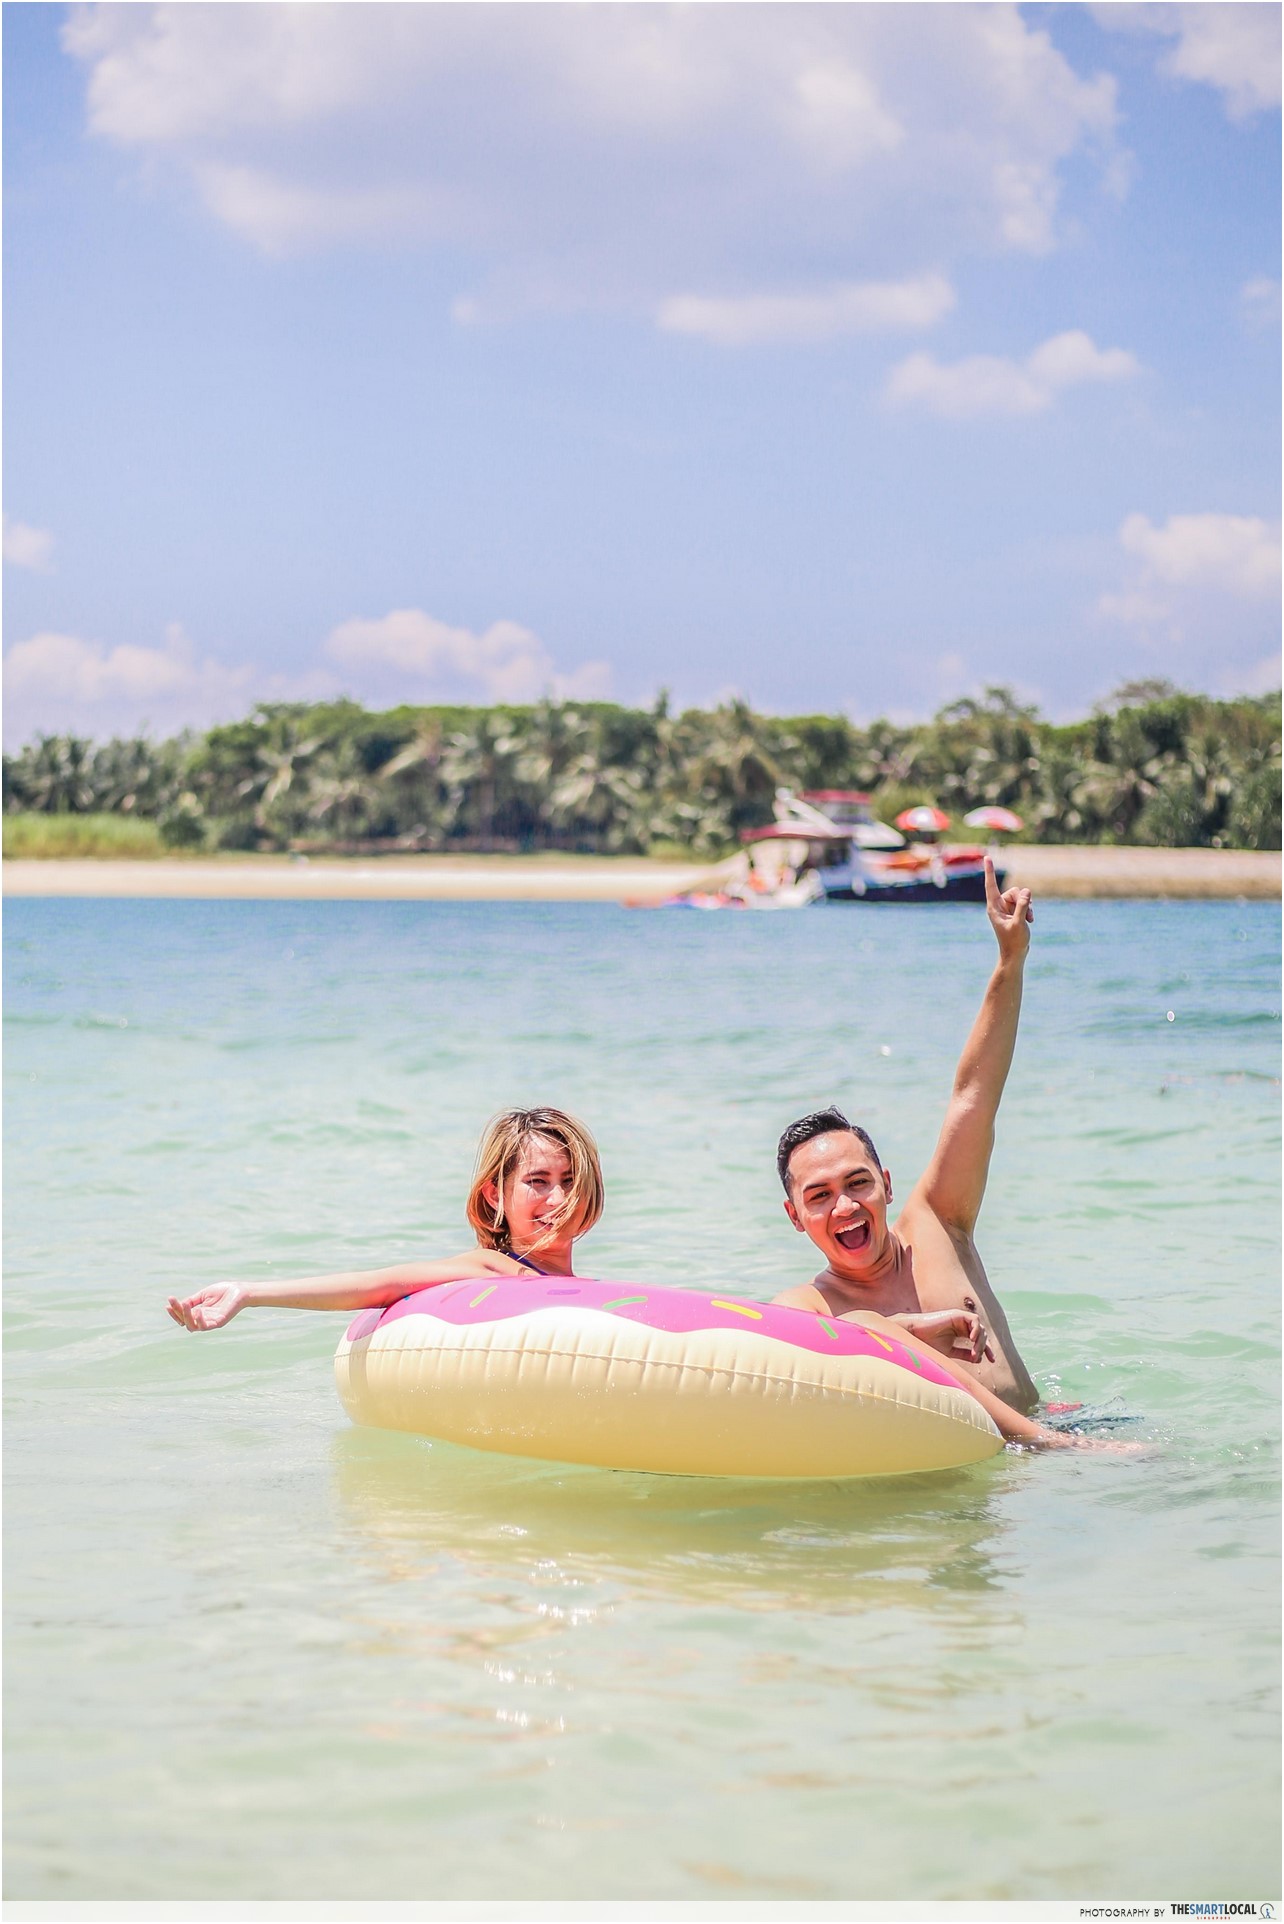 fauzi and beatrice having fun with their float on lazarus island beach